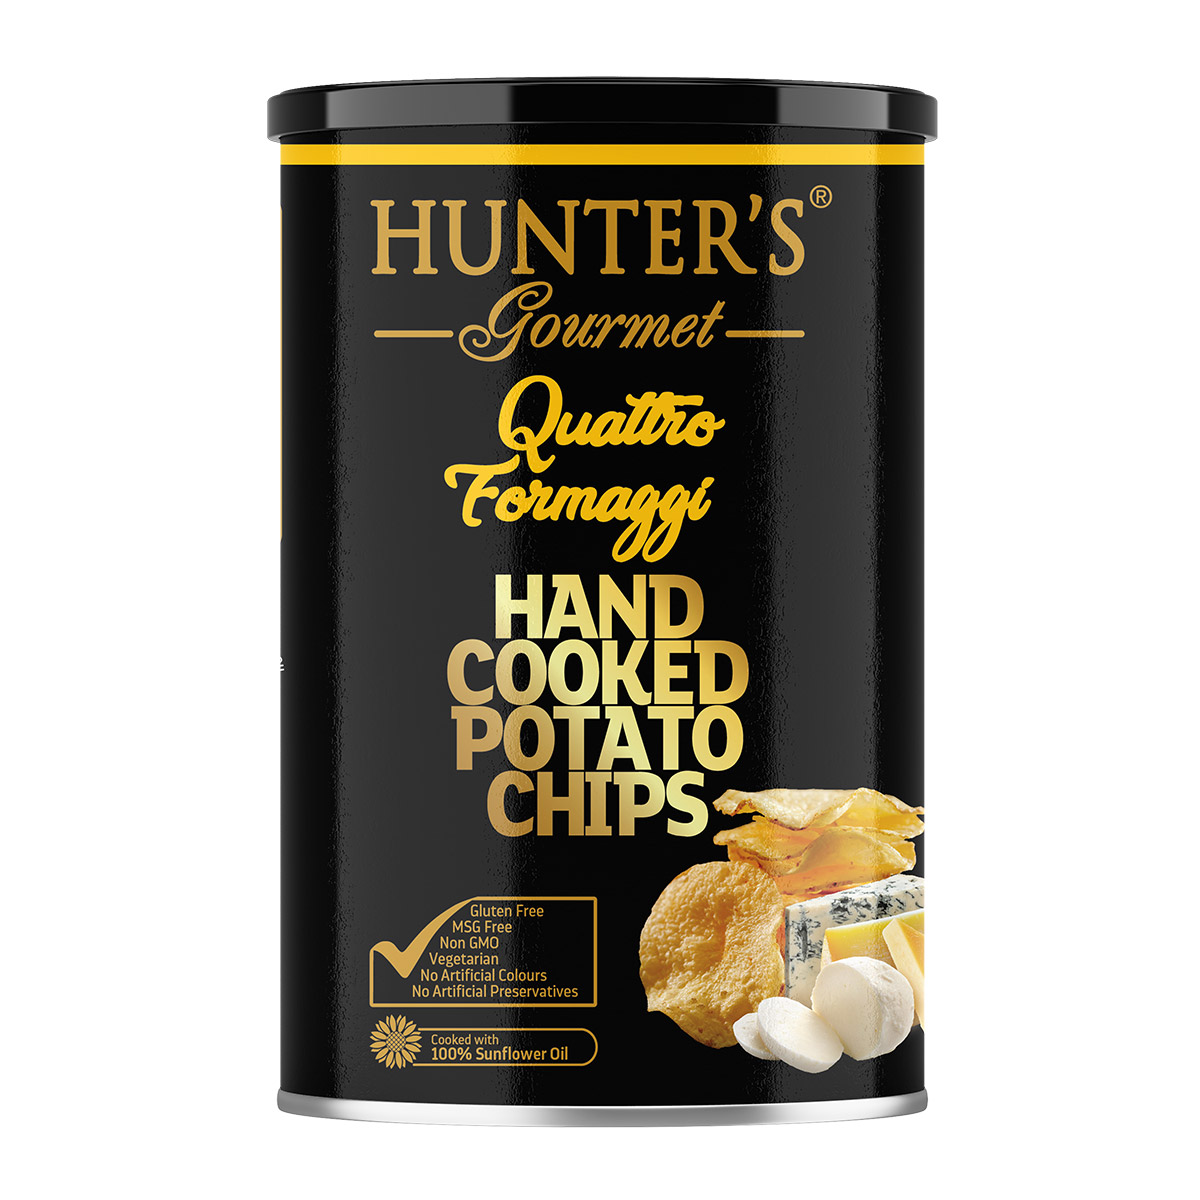 Hunter’s Gourmet Hand Cooked Potato Chips – Quattro Formaggi – Gold Edition (25gm)